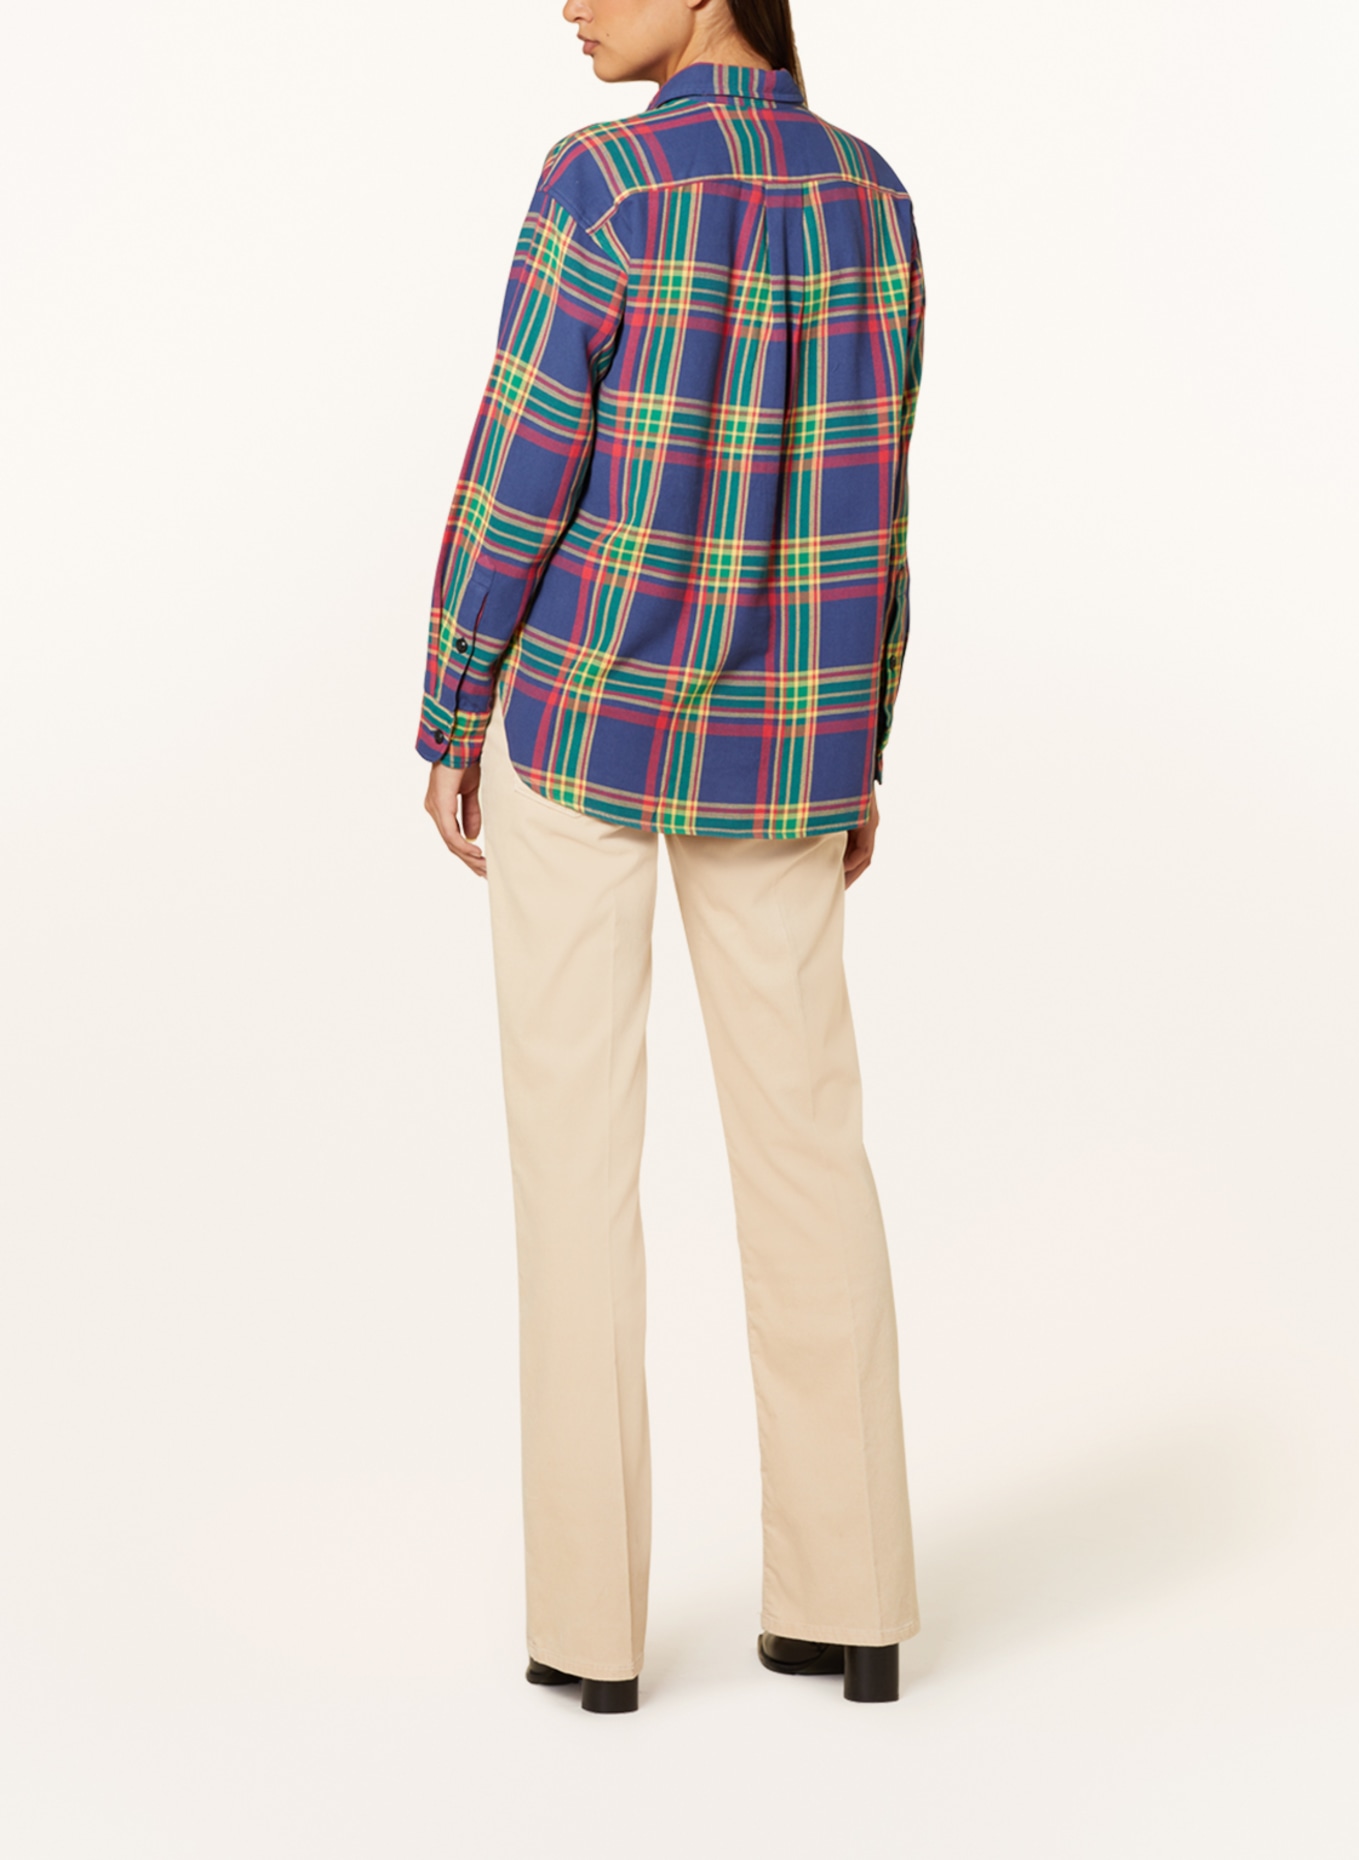 POLO RALPH LAUREN Shirt blouse in flannel, Color: BLUE/ RED/ YELLOW (Image 3)